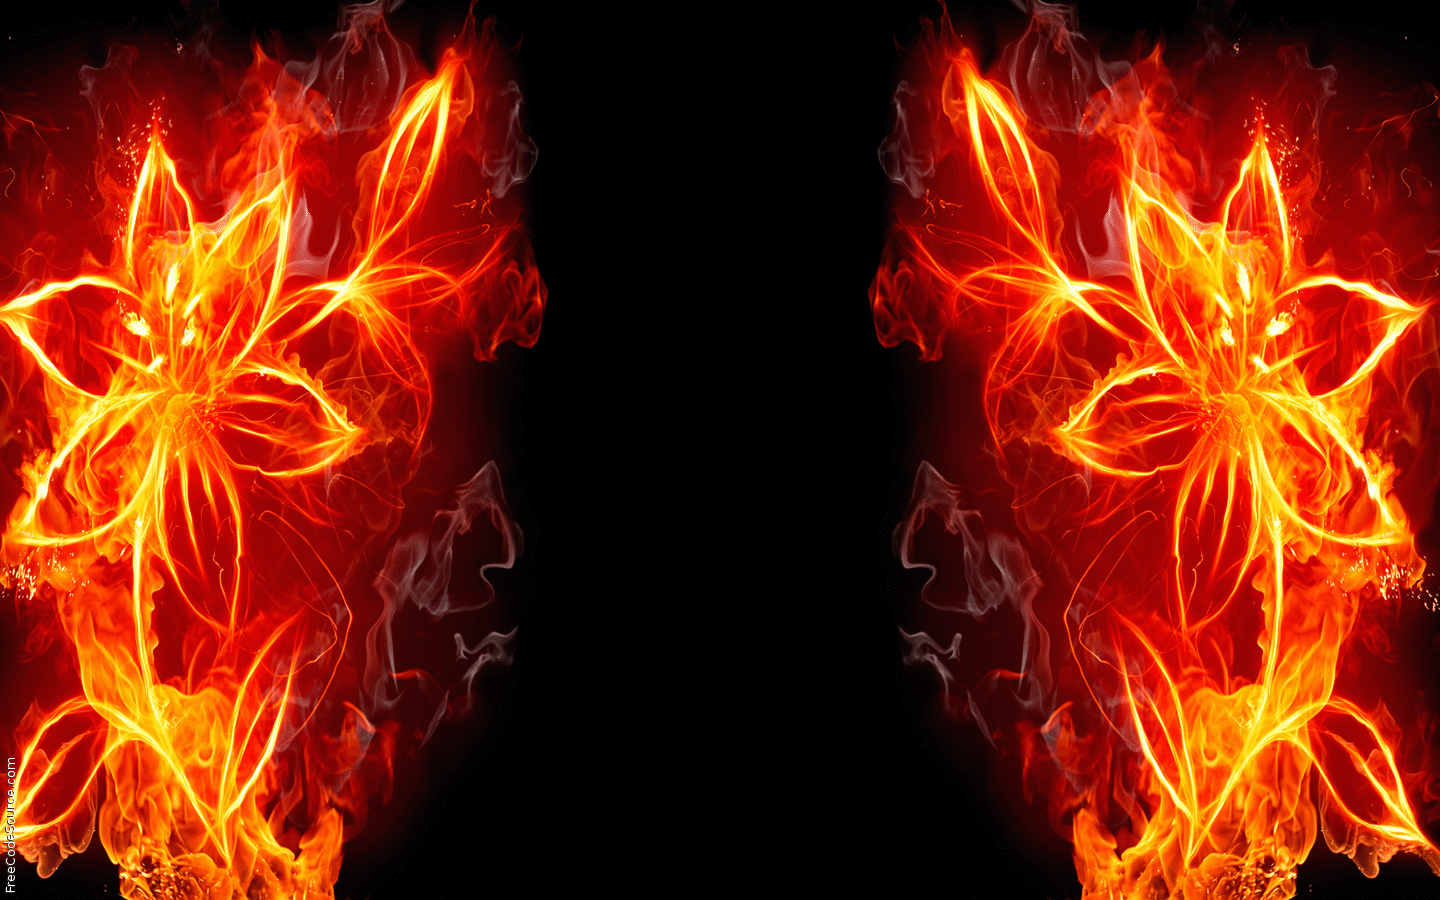 fire background gif 5. GIF Image Download